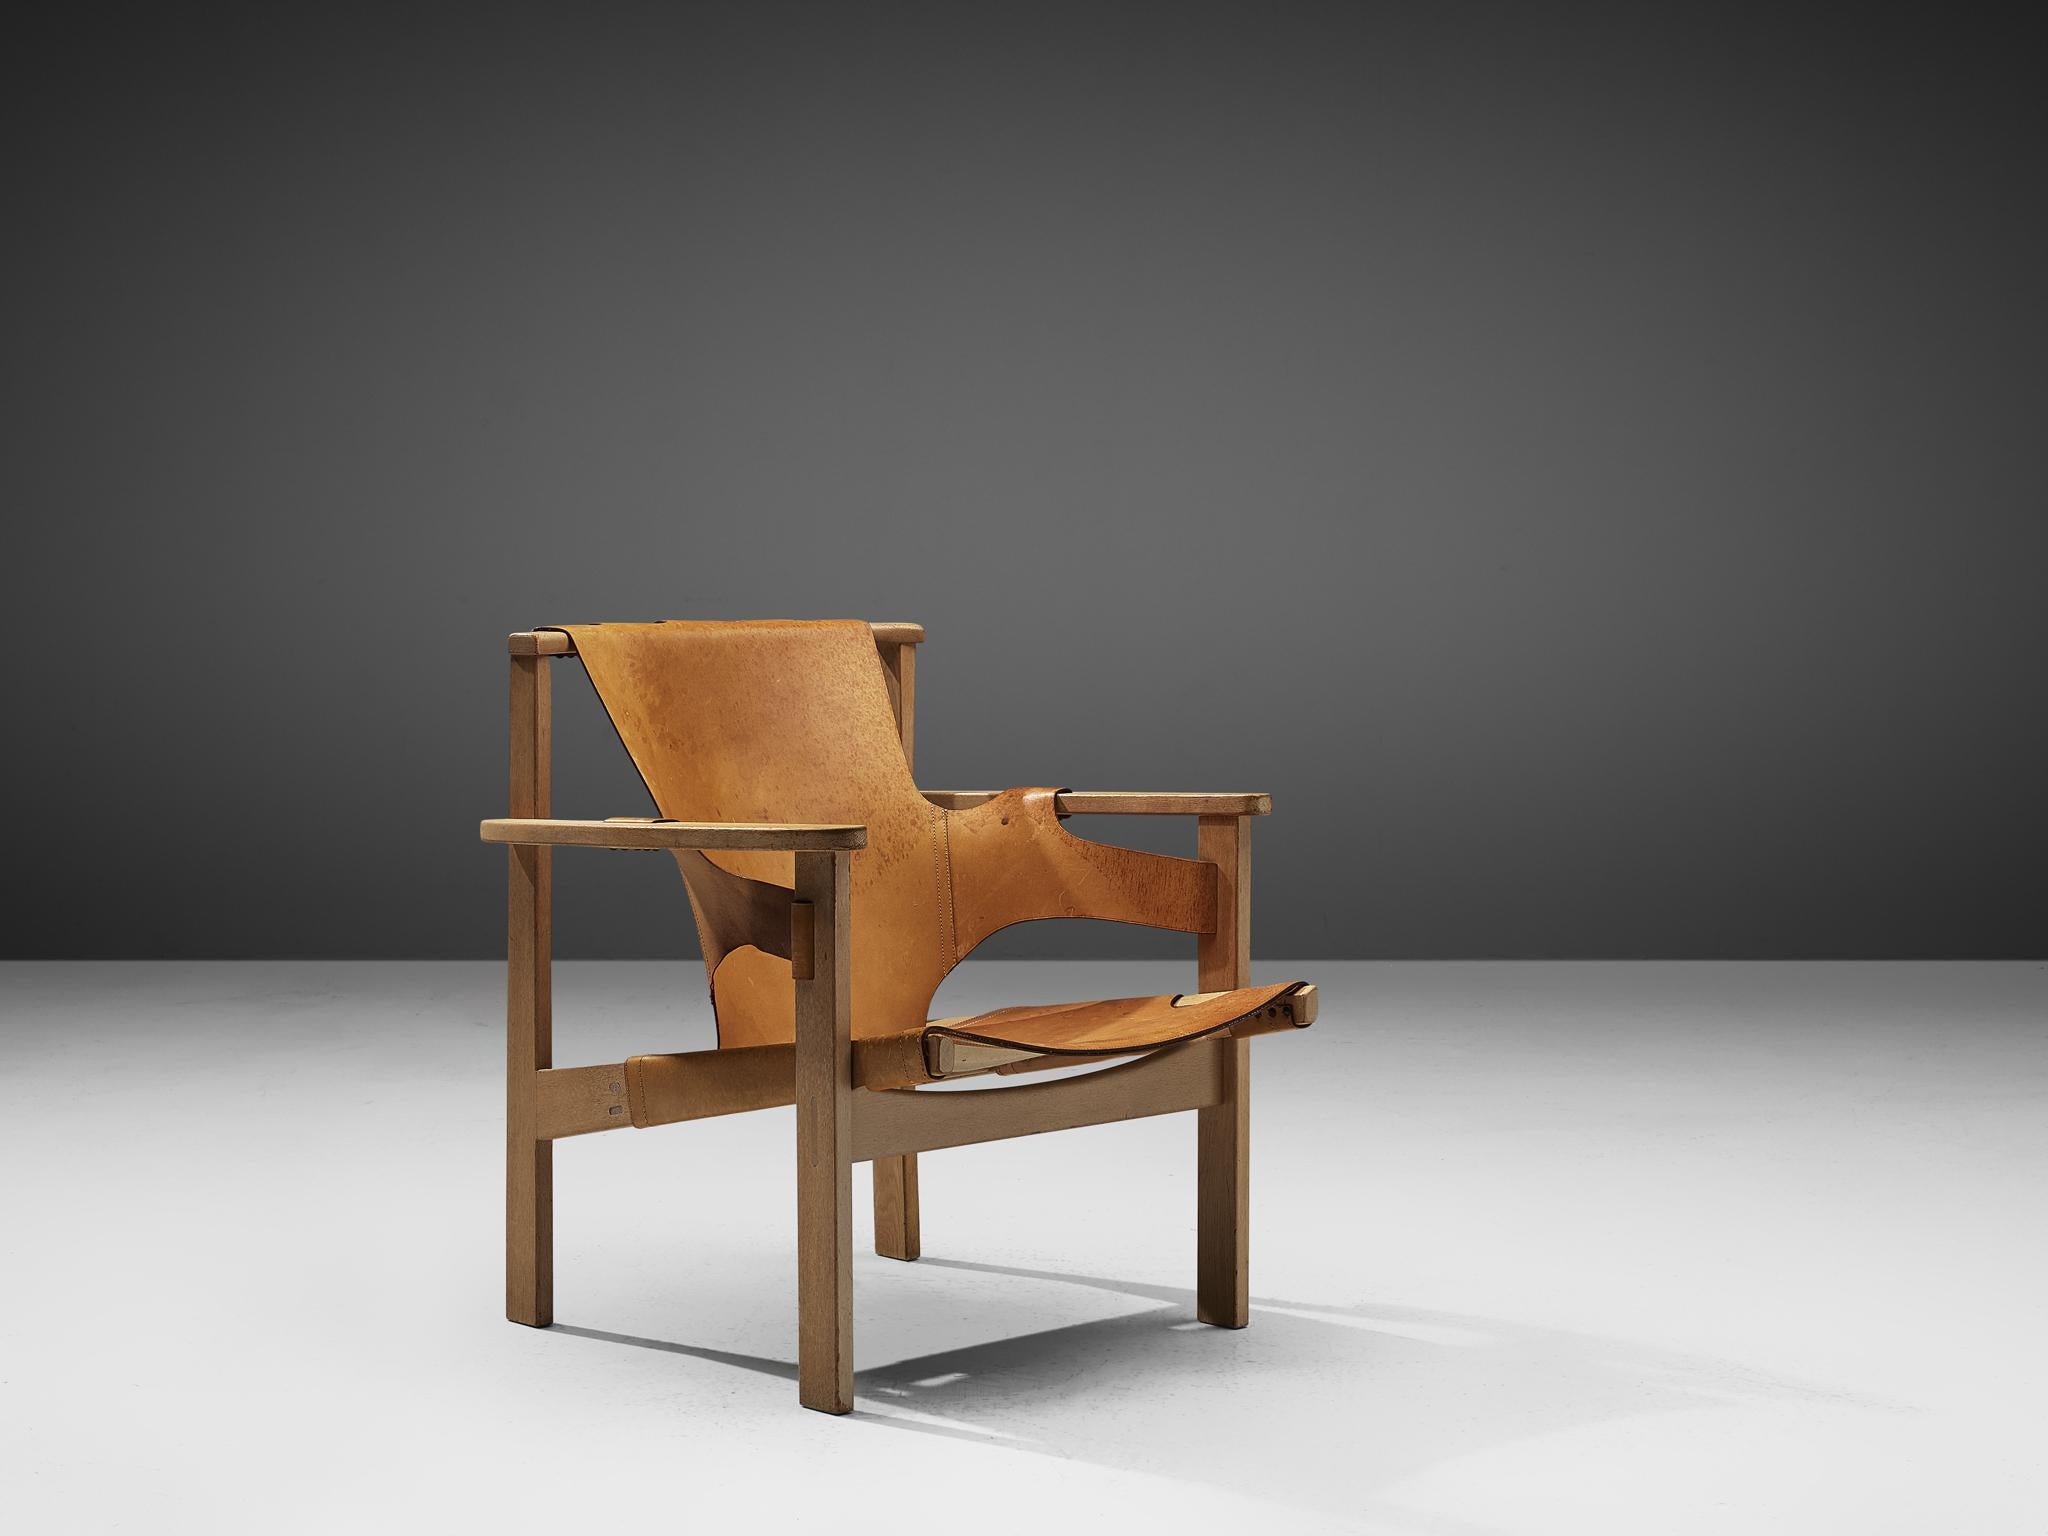 Carl-Axel Acking for NK (Nordiska Kompaniet), 'Trienna' chair, in stained oak and leather, Sweden, 1957.

This robust chair is designed by the Swedish architect Carl-Axel Acking and produced by Nordiska Kompaniet. The name of the chair is derived